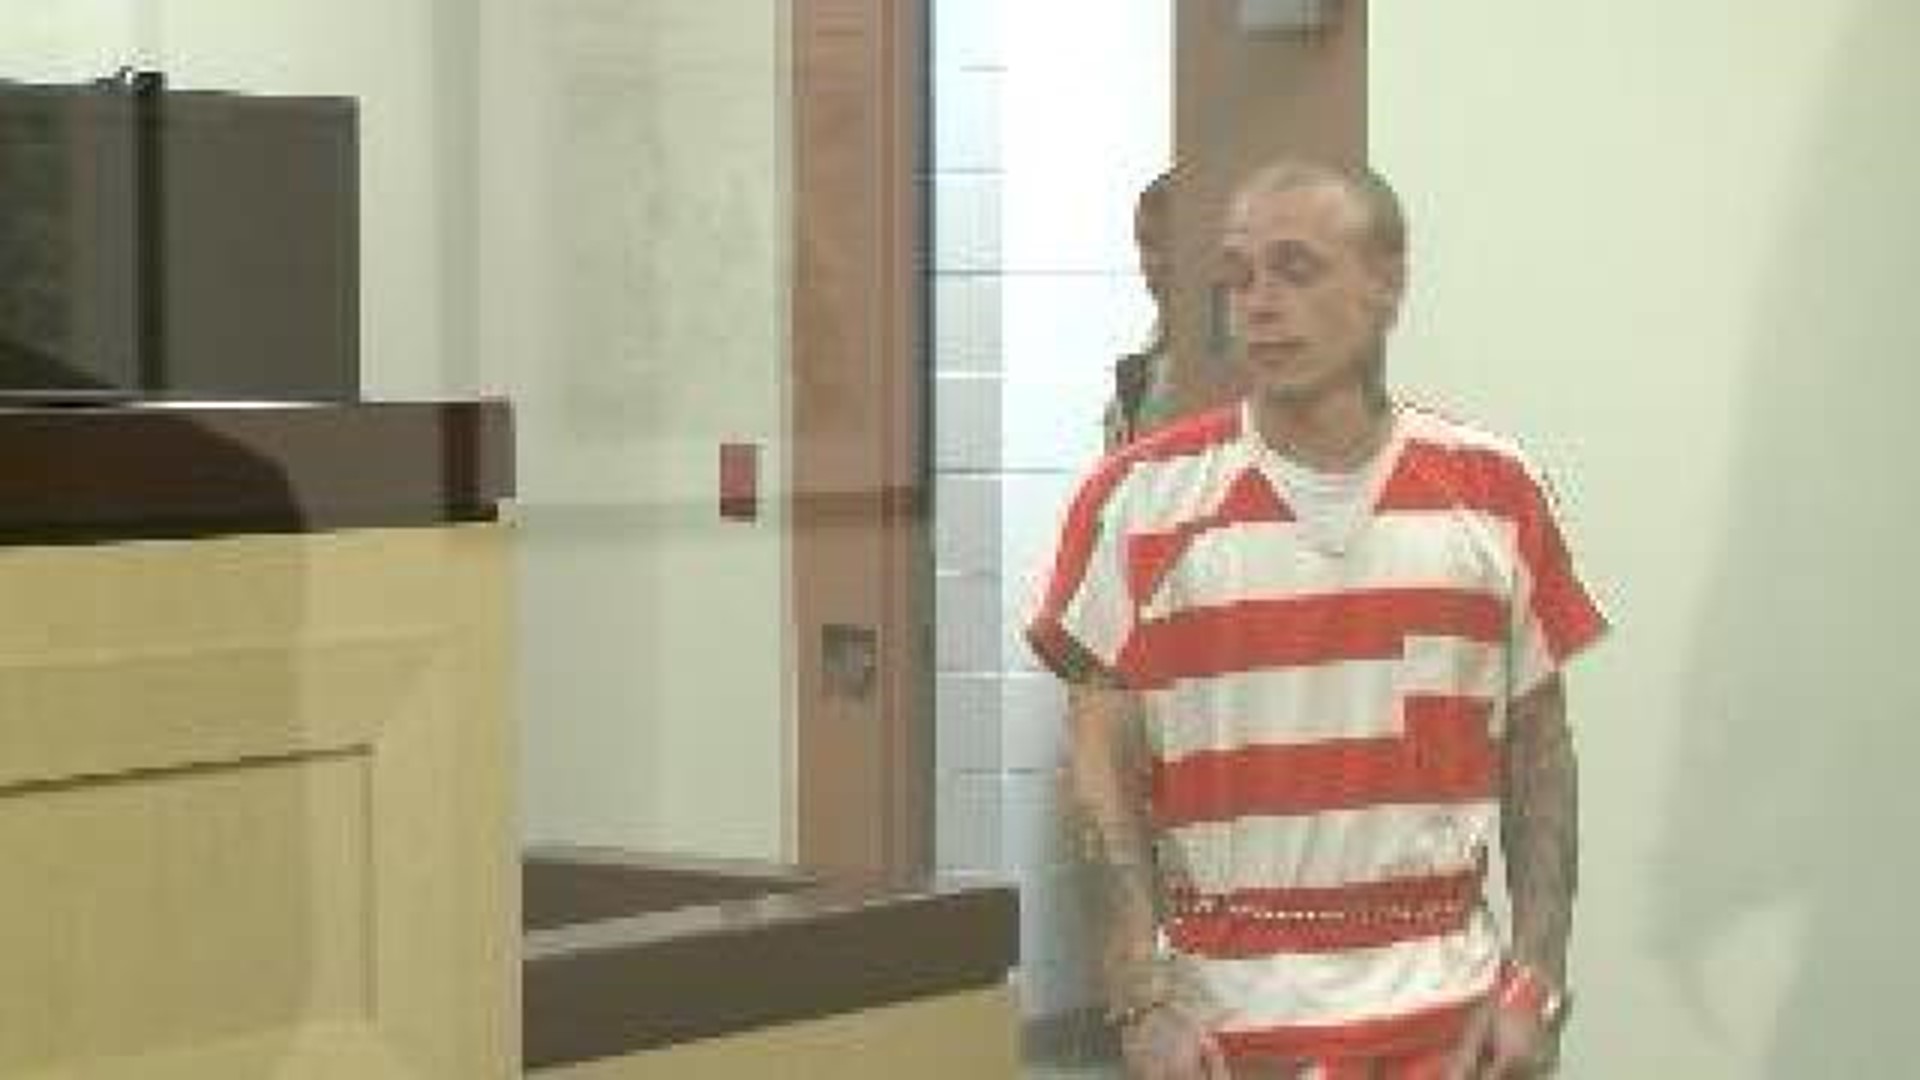 Shooting Suspect Makes First Court Appearance